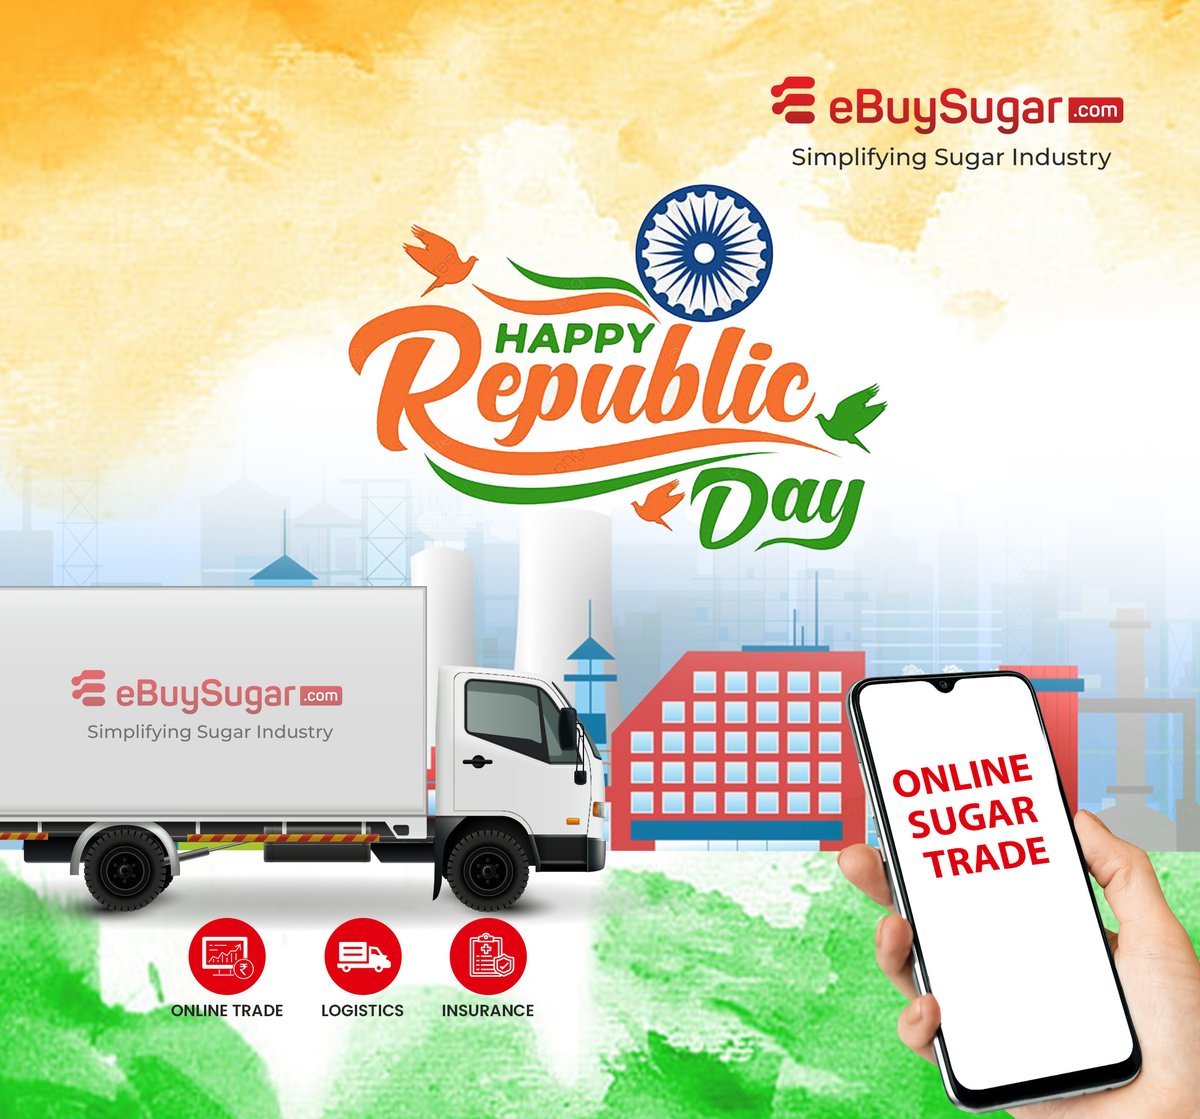 🇮🇳 Happy Republic Day! 🇮🇳 Let's celebrate the spirit of unity, diversity & freedom by embracing digital solutions and innovation! Let #eBuySugar be your partner in success, whether you're a trader or a miller! Jai Hind! 🇮🇳 #RepublicDay #SugarTrade #DigitalPlatform #SugarMill